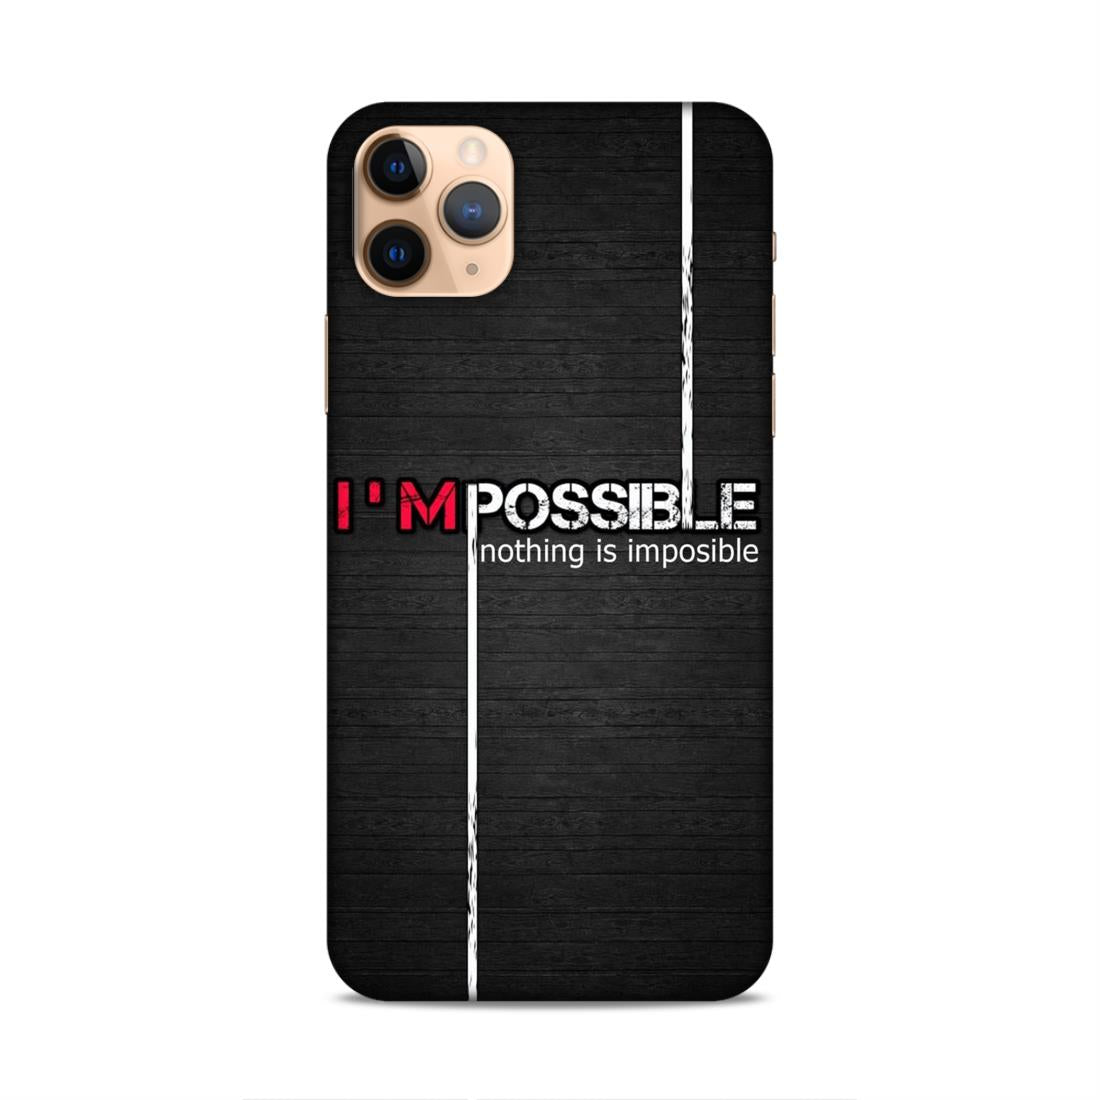 I'm Possible Hard Back Case For Apple iPhone 11 Pro